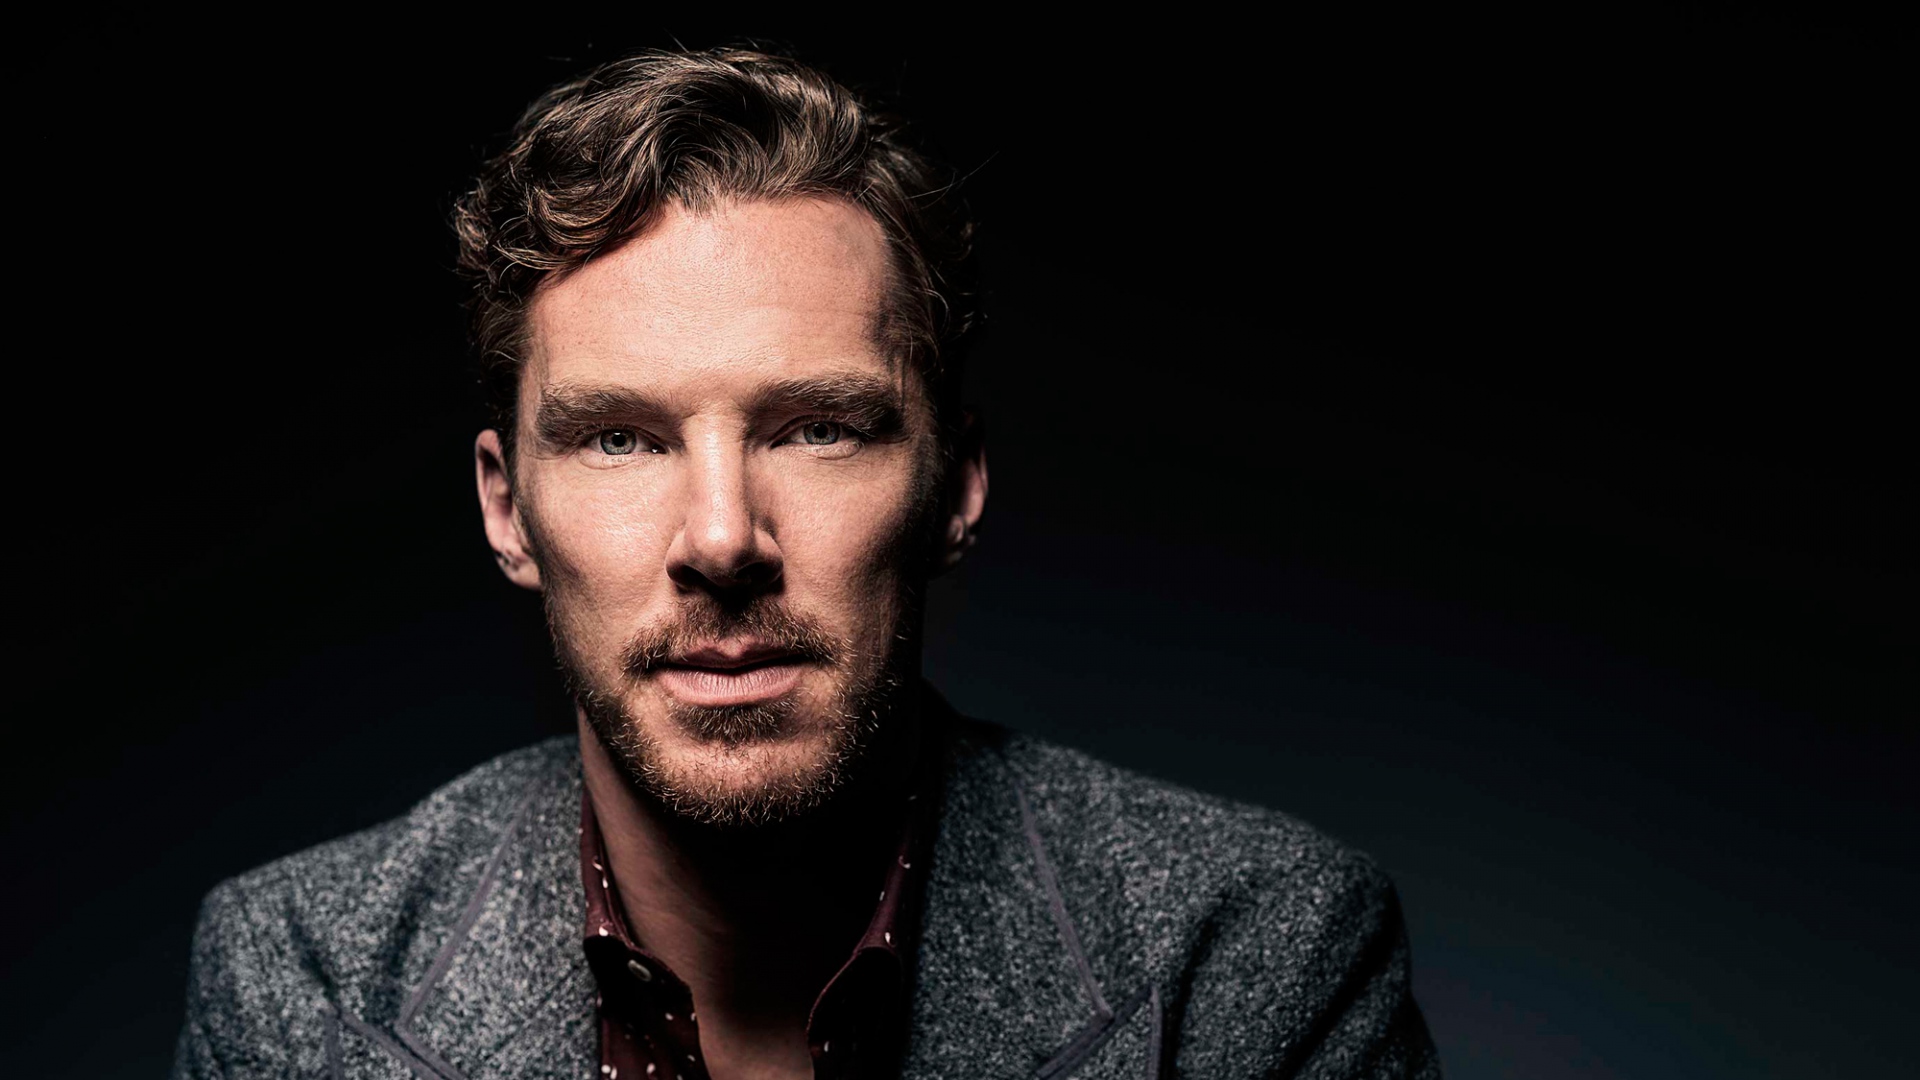 7 Tips for Success from Benedict Cumberbatch